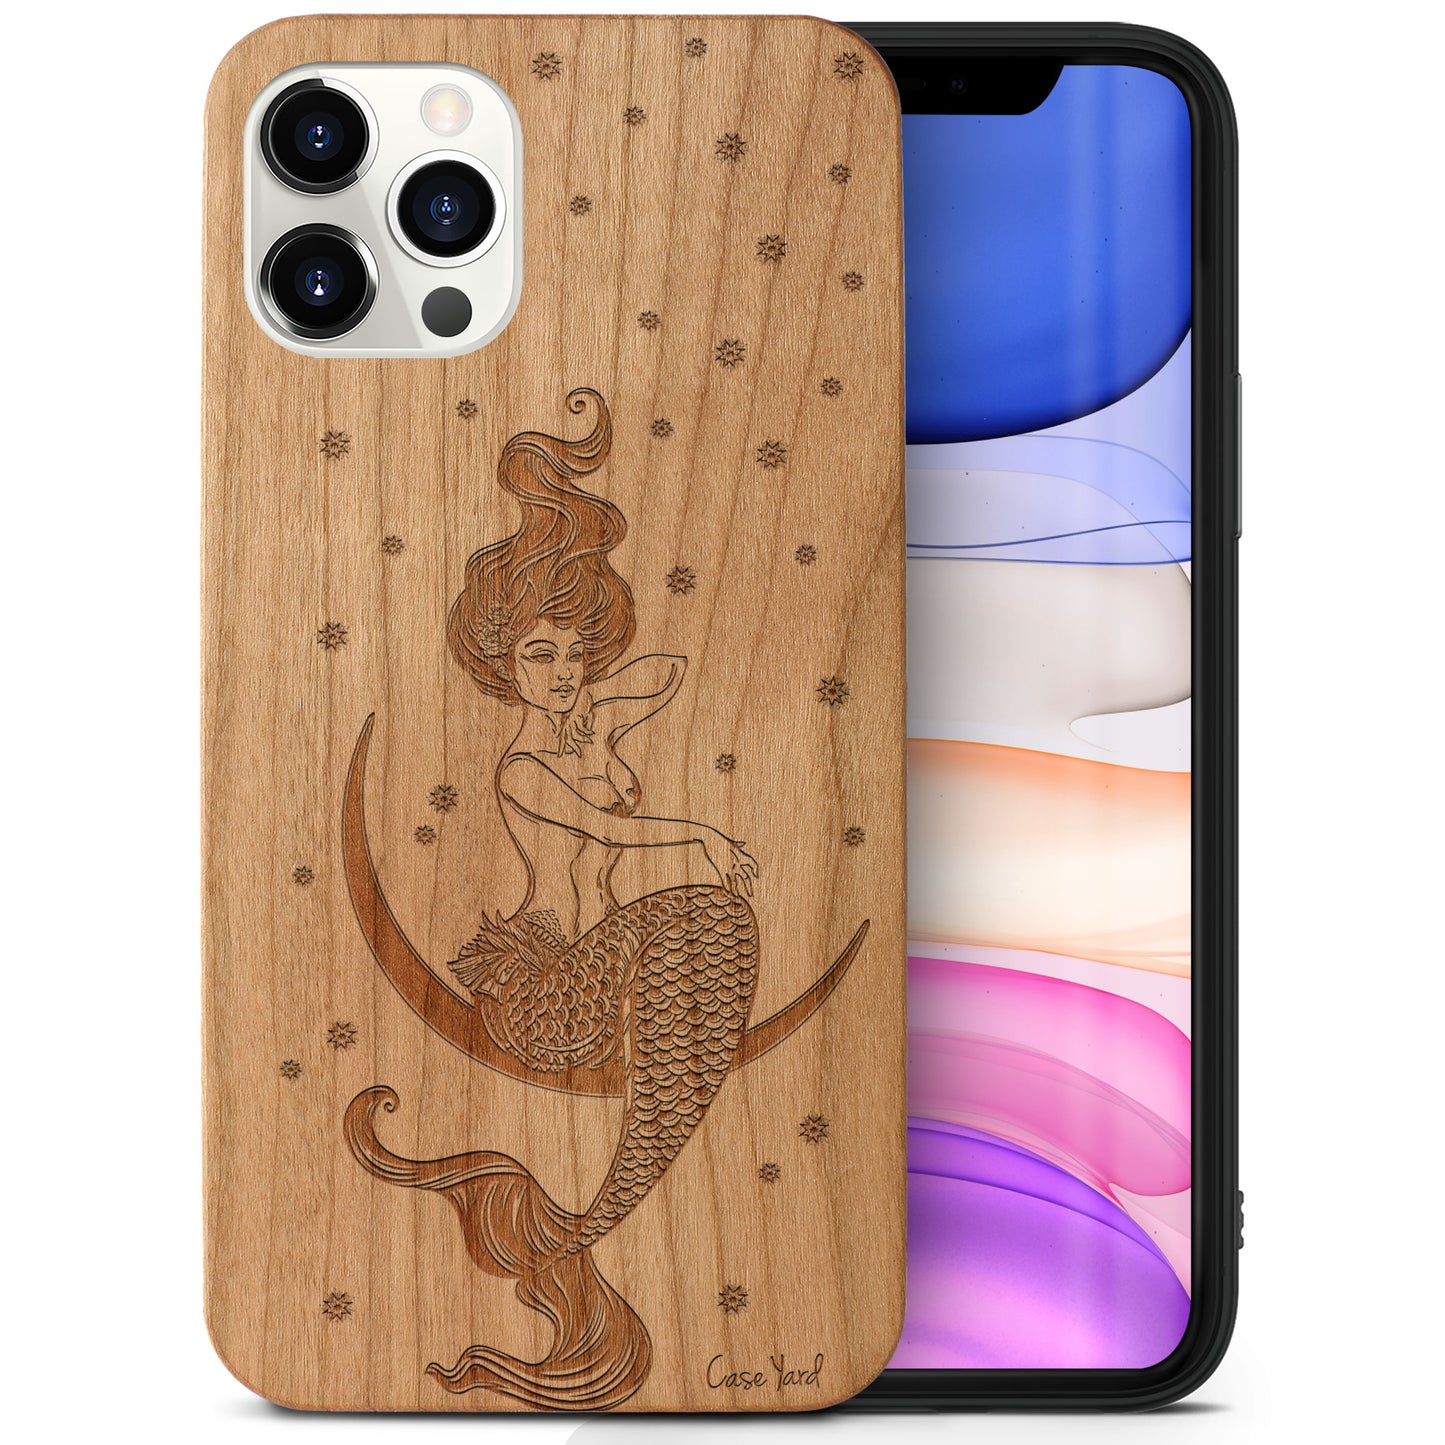 Wooden Cell Phone Case Cover, Laser Engraved case for iPhone & Samsung phone Mermaid on the Moon Design